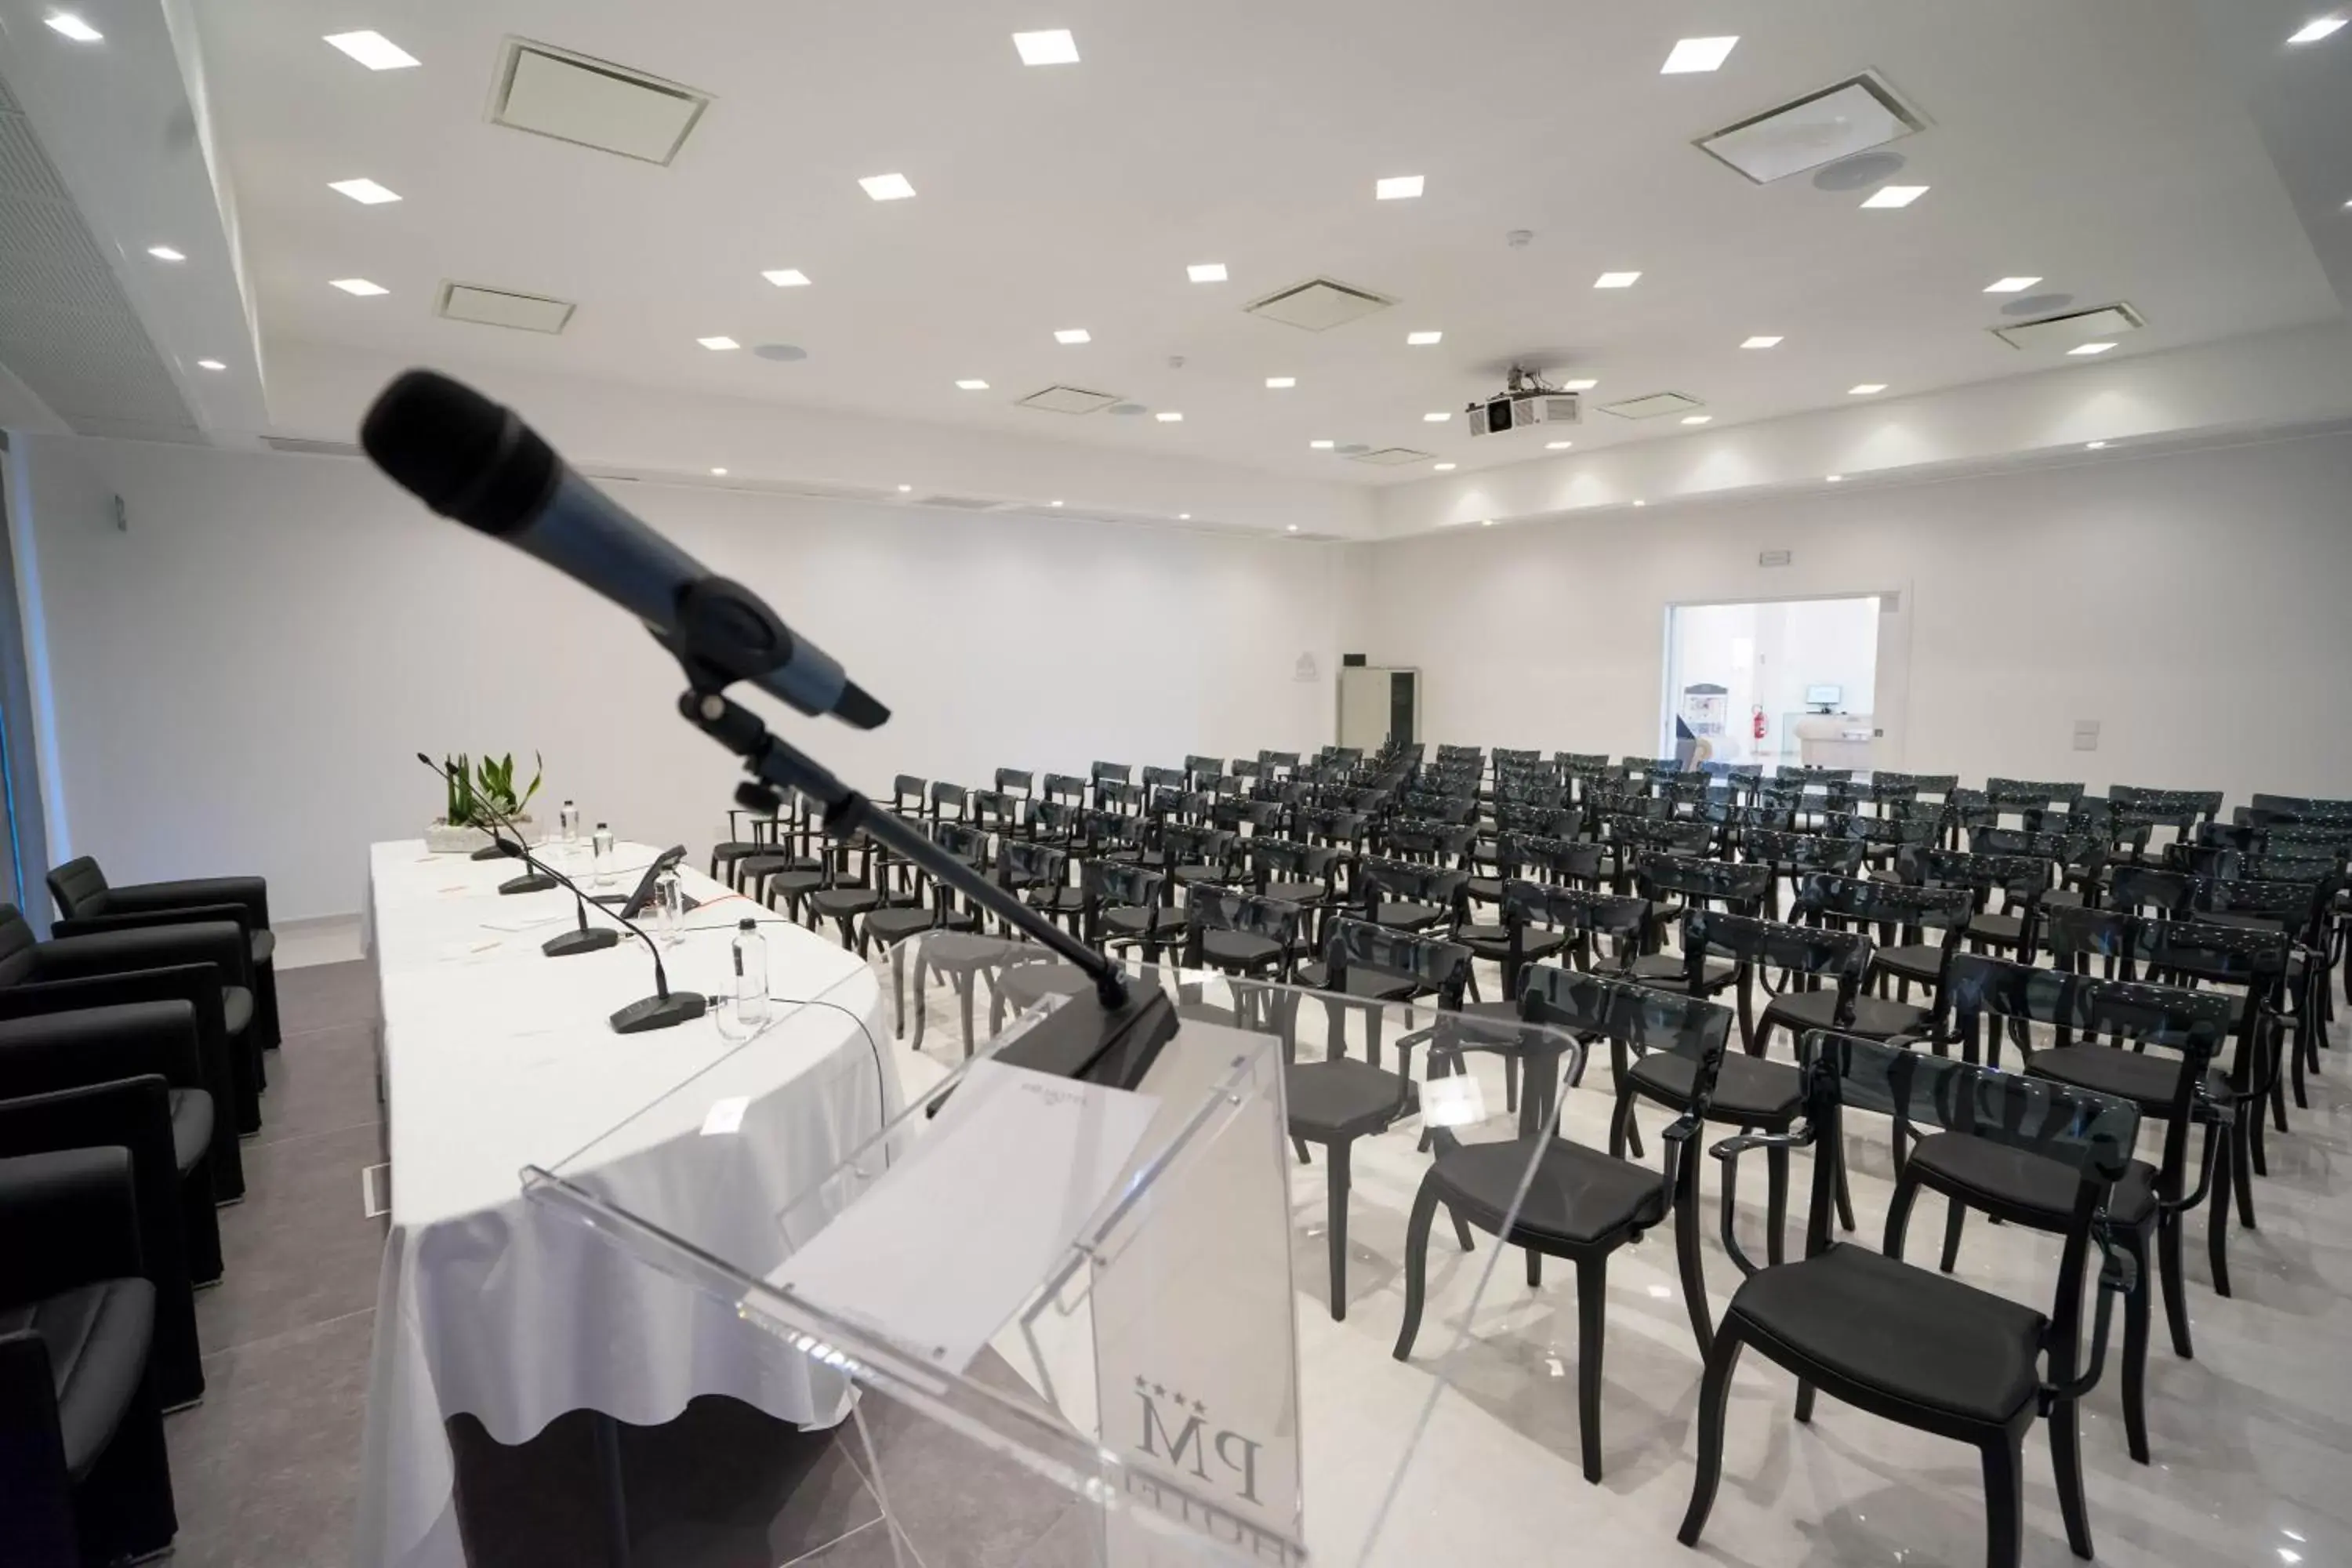 Meeting/conference room, Banquet Facilities in PM HOTEL